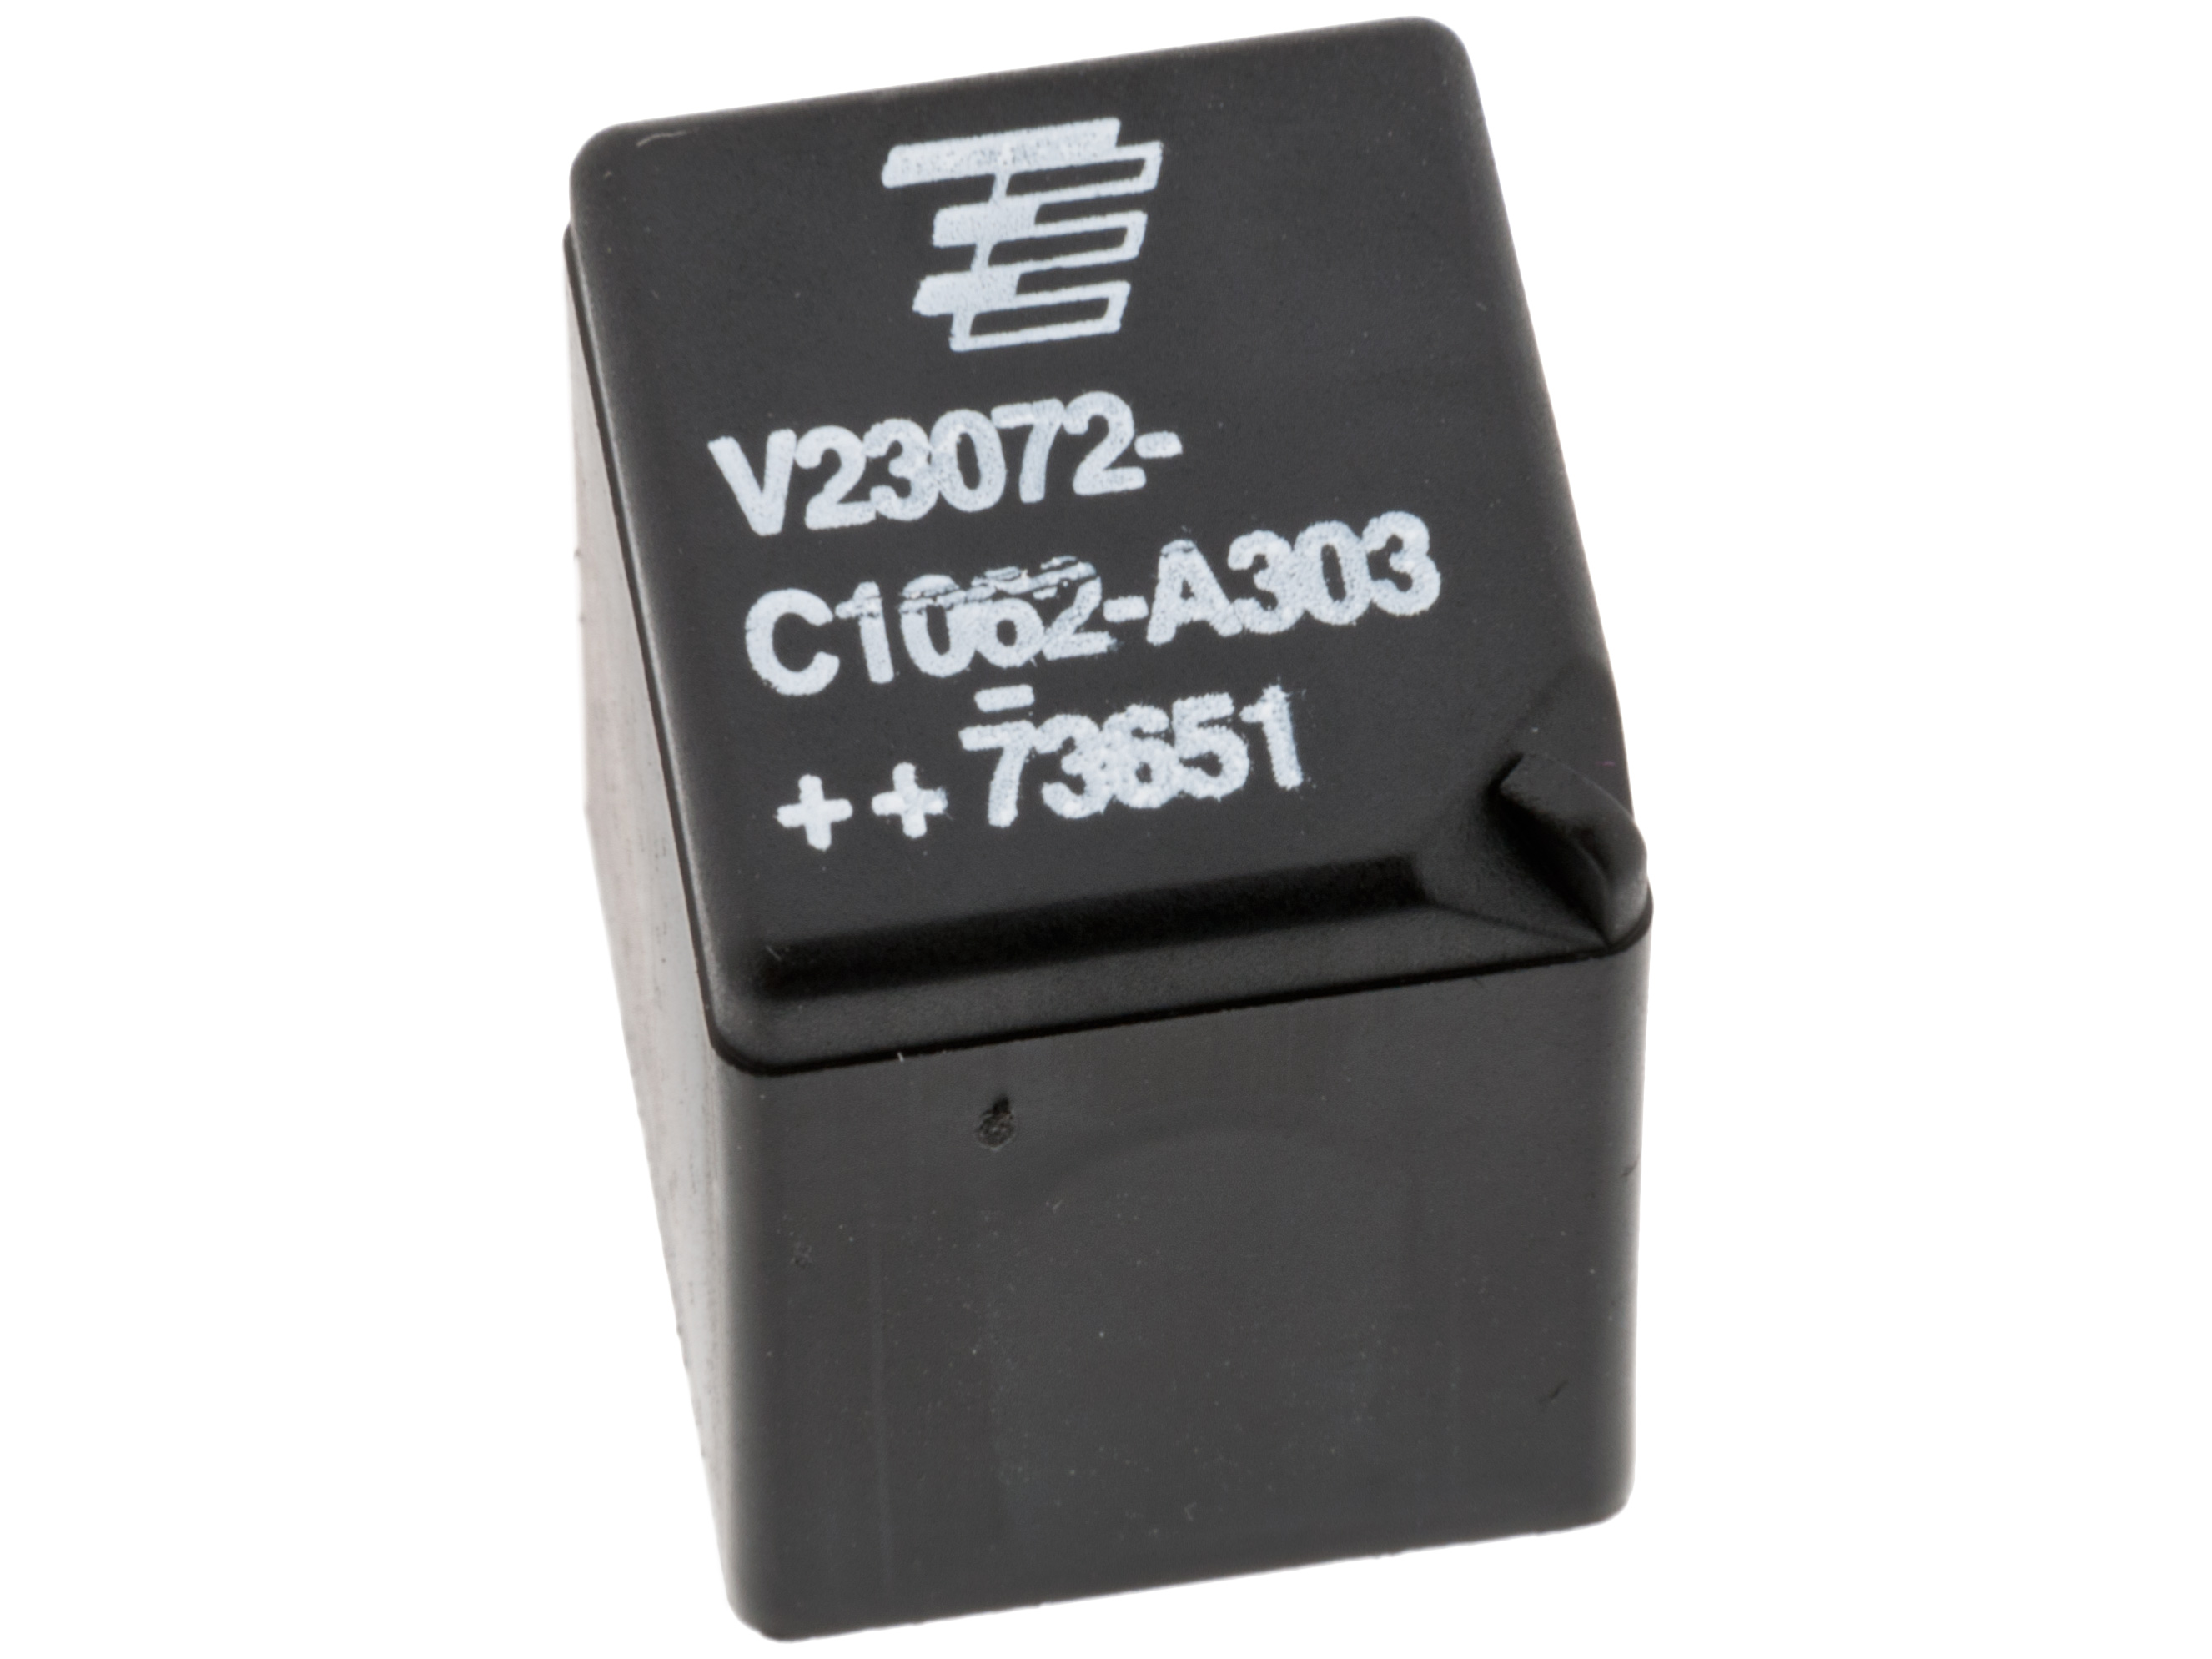 Relay V23072C1061A303 1-p switching 12V 10A @ electrokit